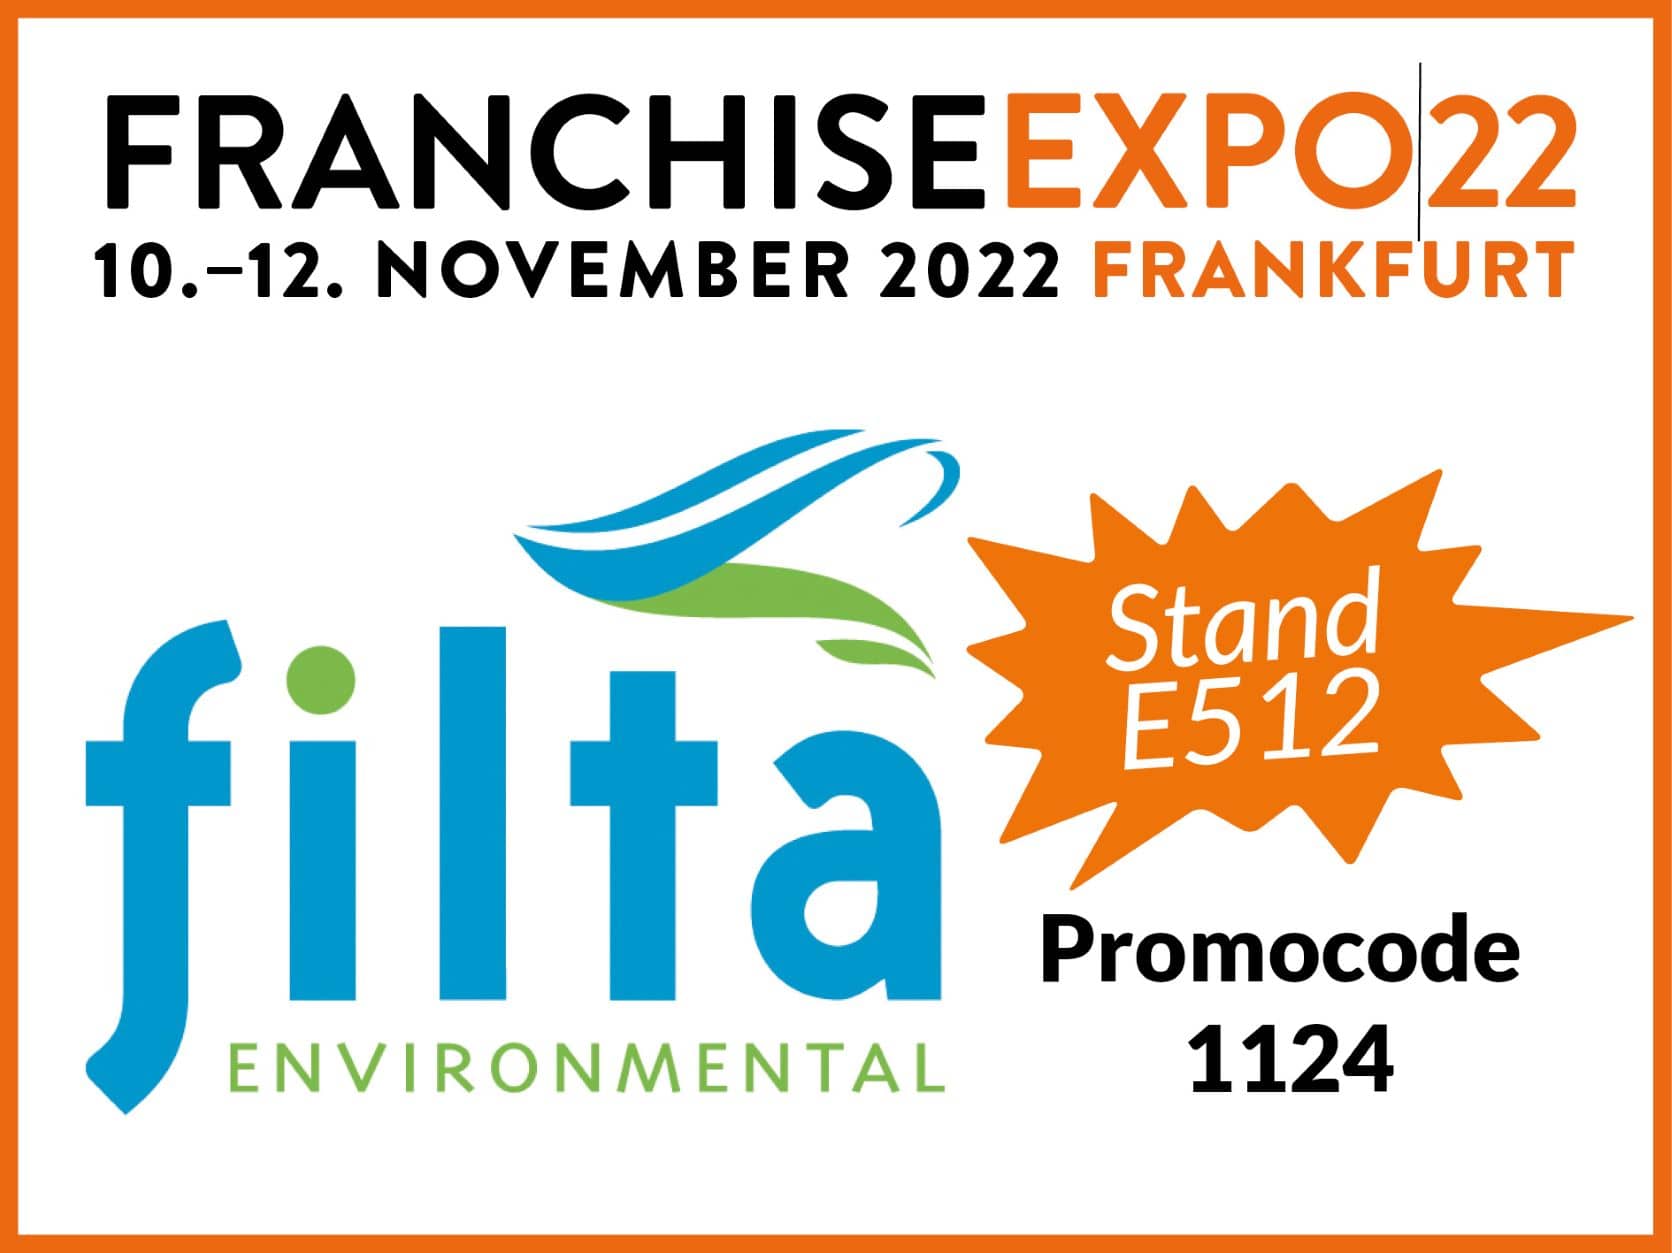 Franchise Expo Frankfurt - We are coming!